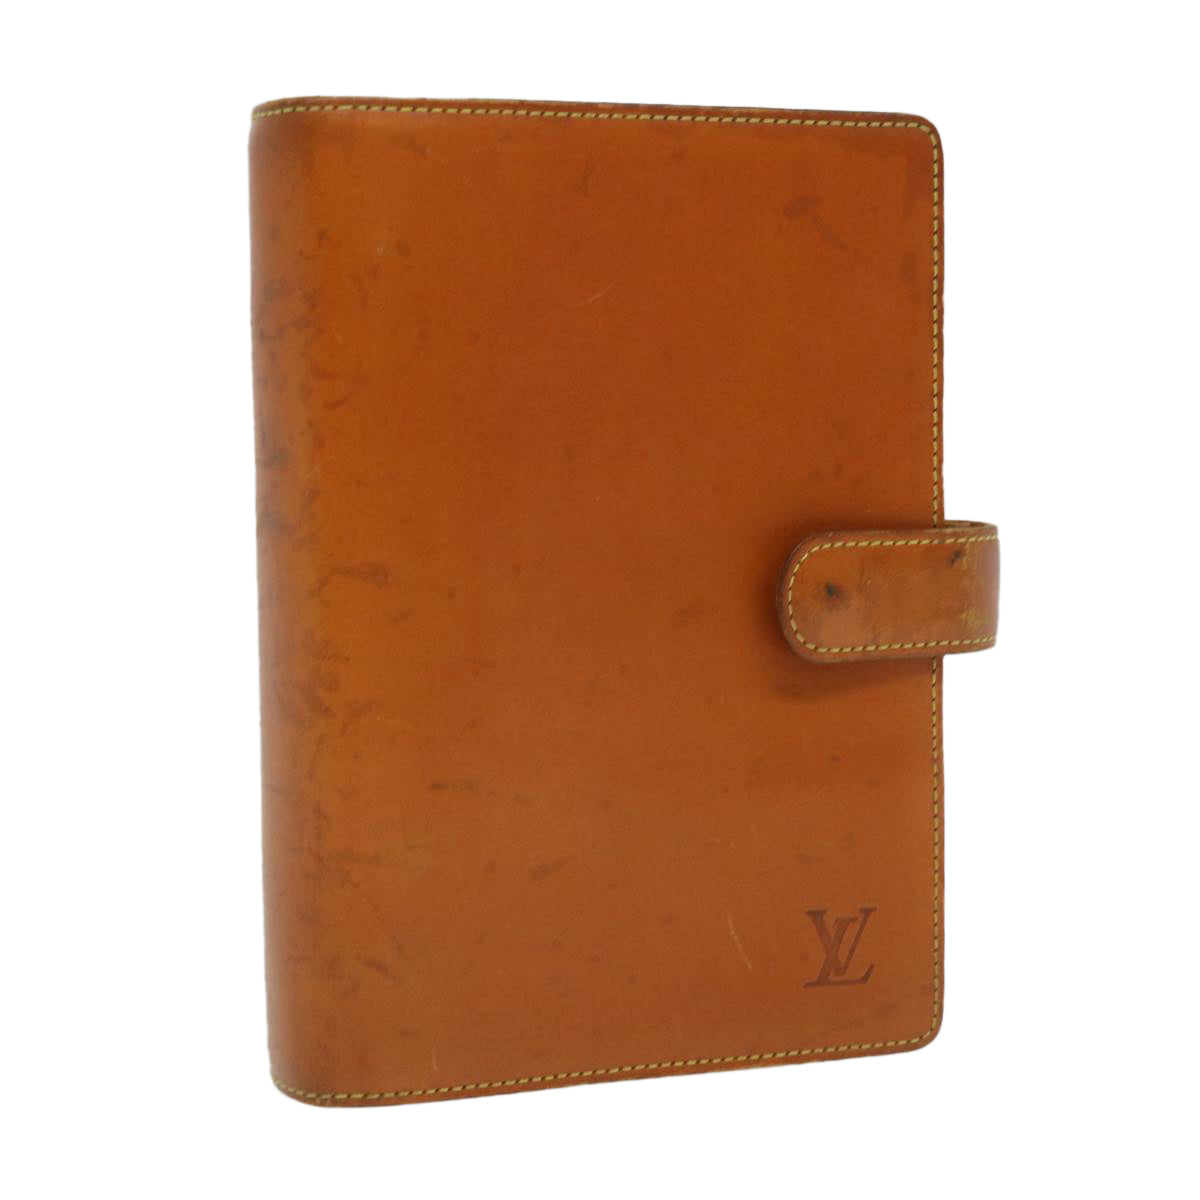 LOUIS VUITTON Nomad Agenda MM Day Planner Cover Brown R20105 LV Auth 32099